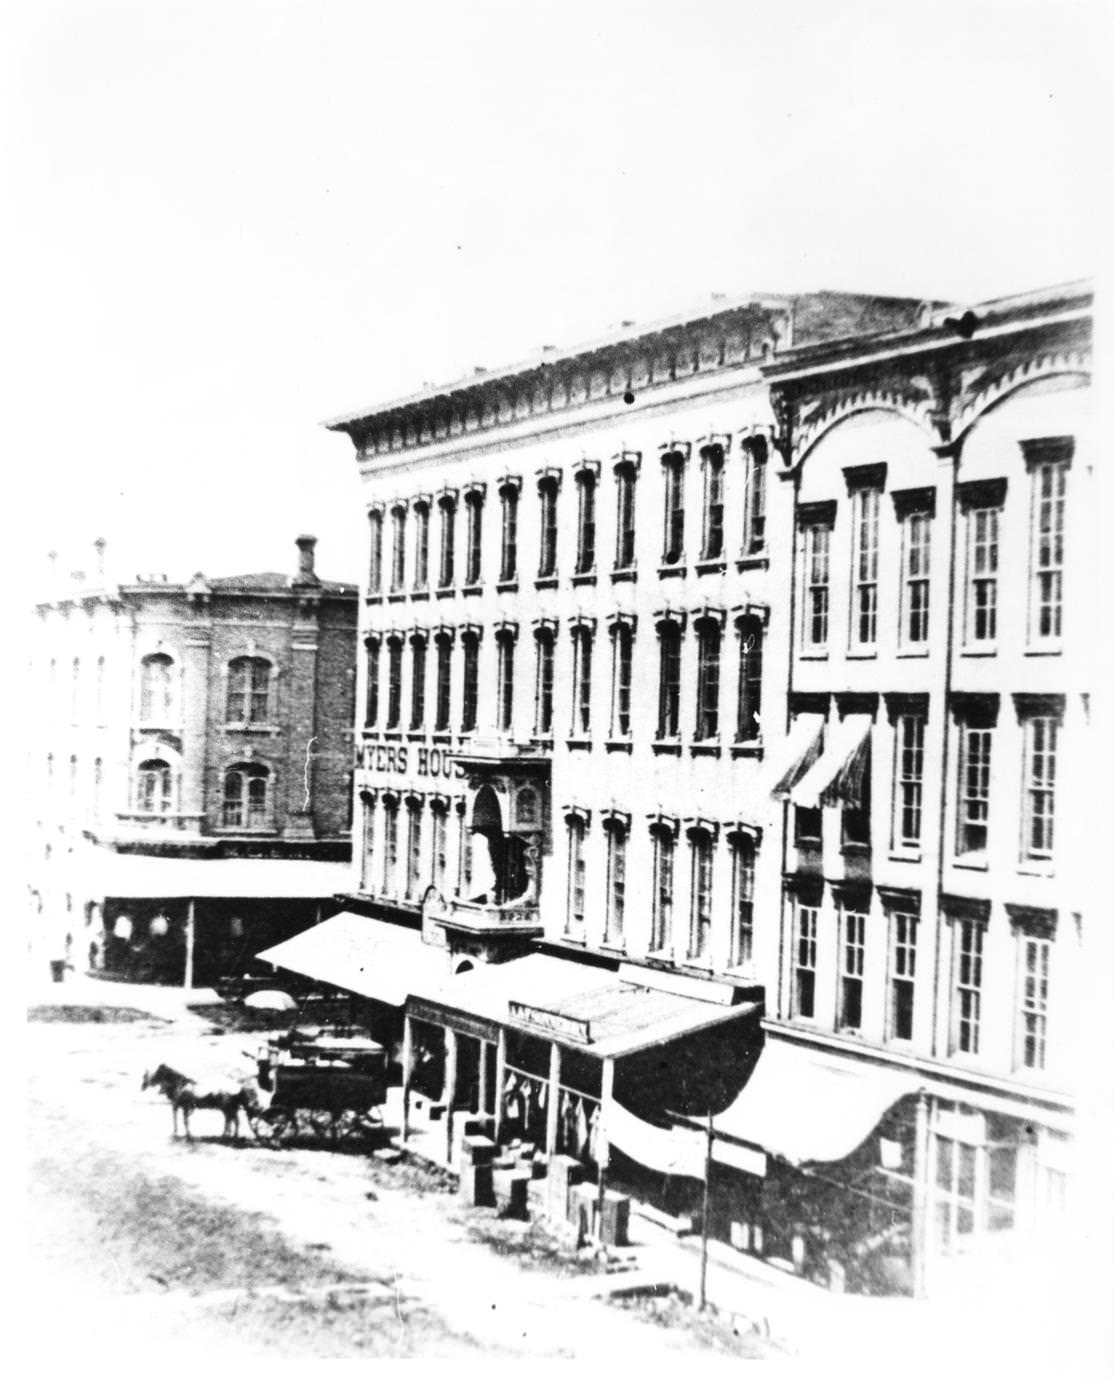 Myers House Hotel from South Main Street. Photo includes an unpaved street, a horse and coach, 1875